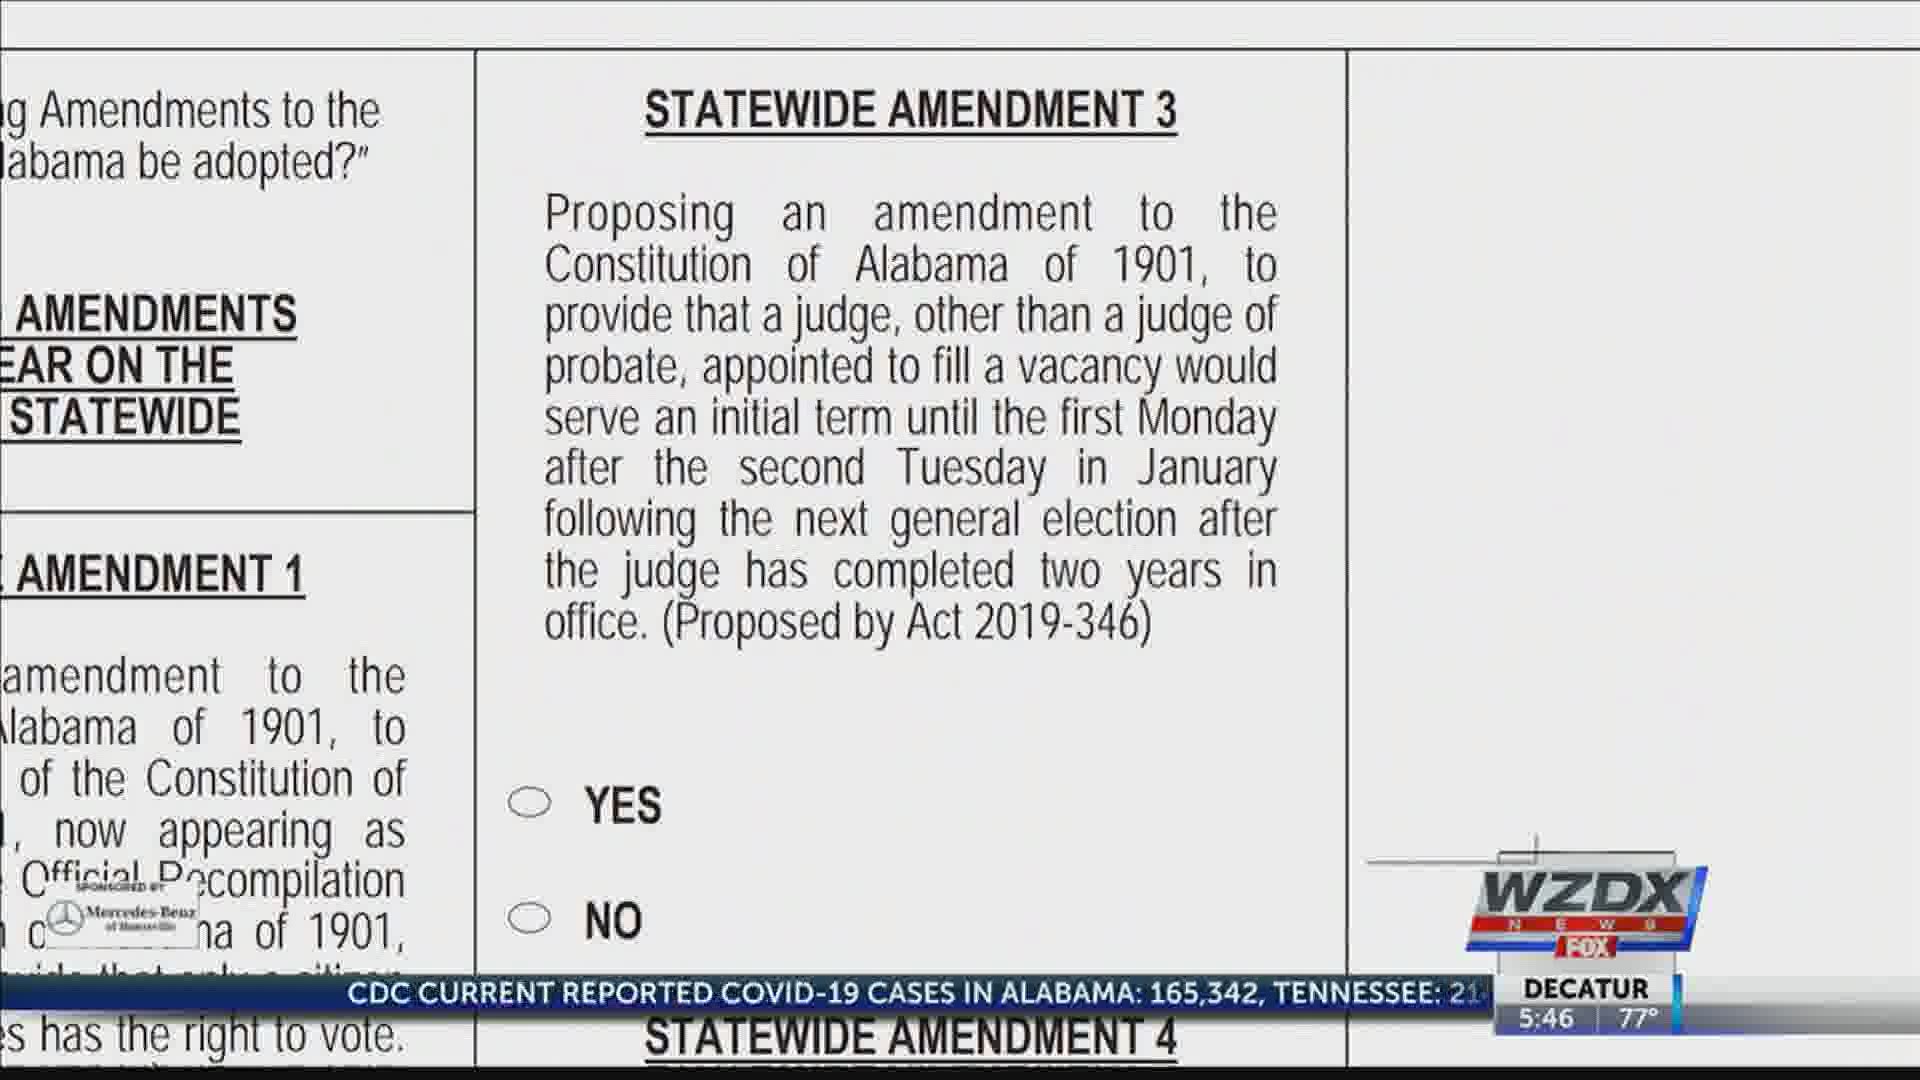 In addition to candidates running for office, there are six Alabama statewide amendments on the ballot.